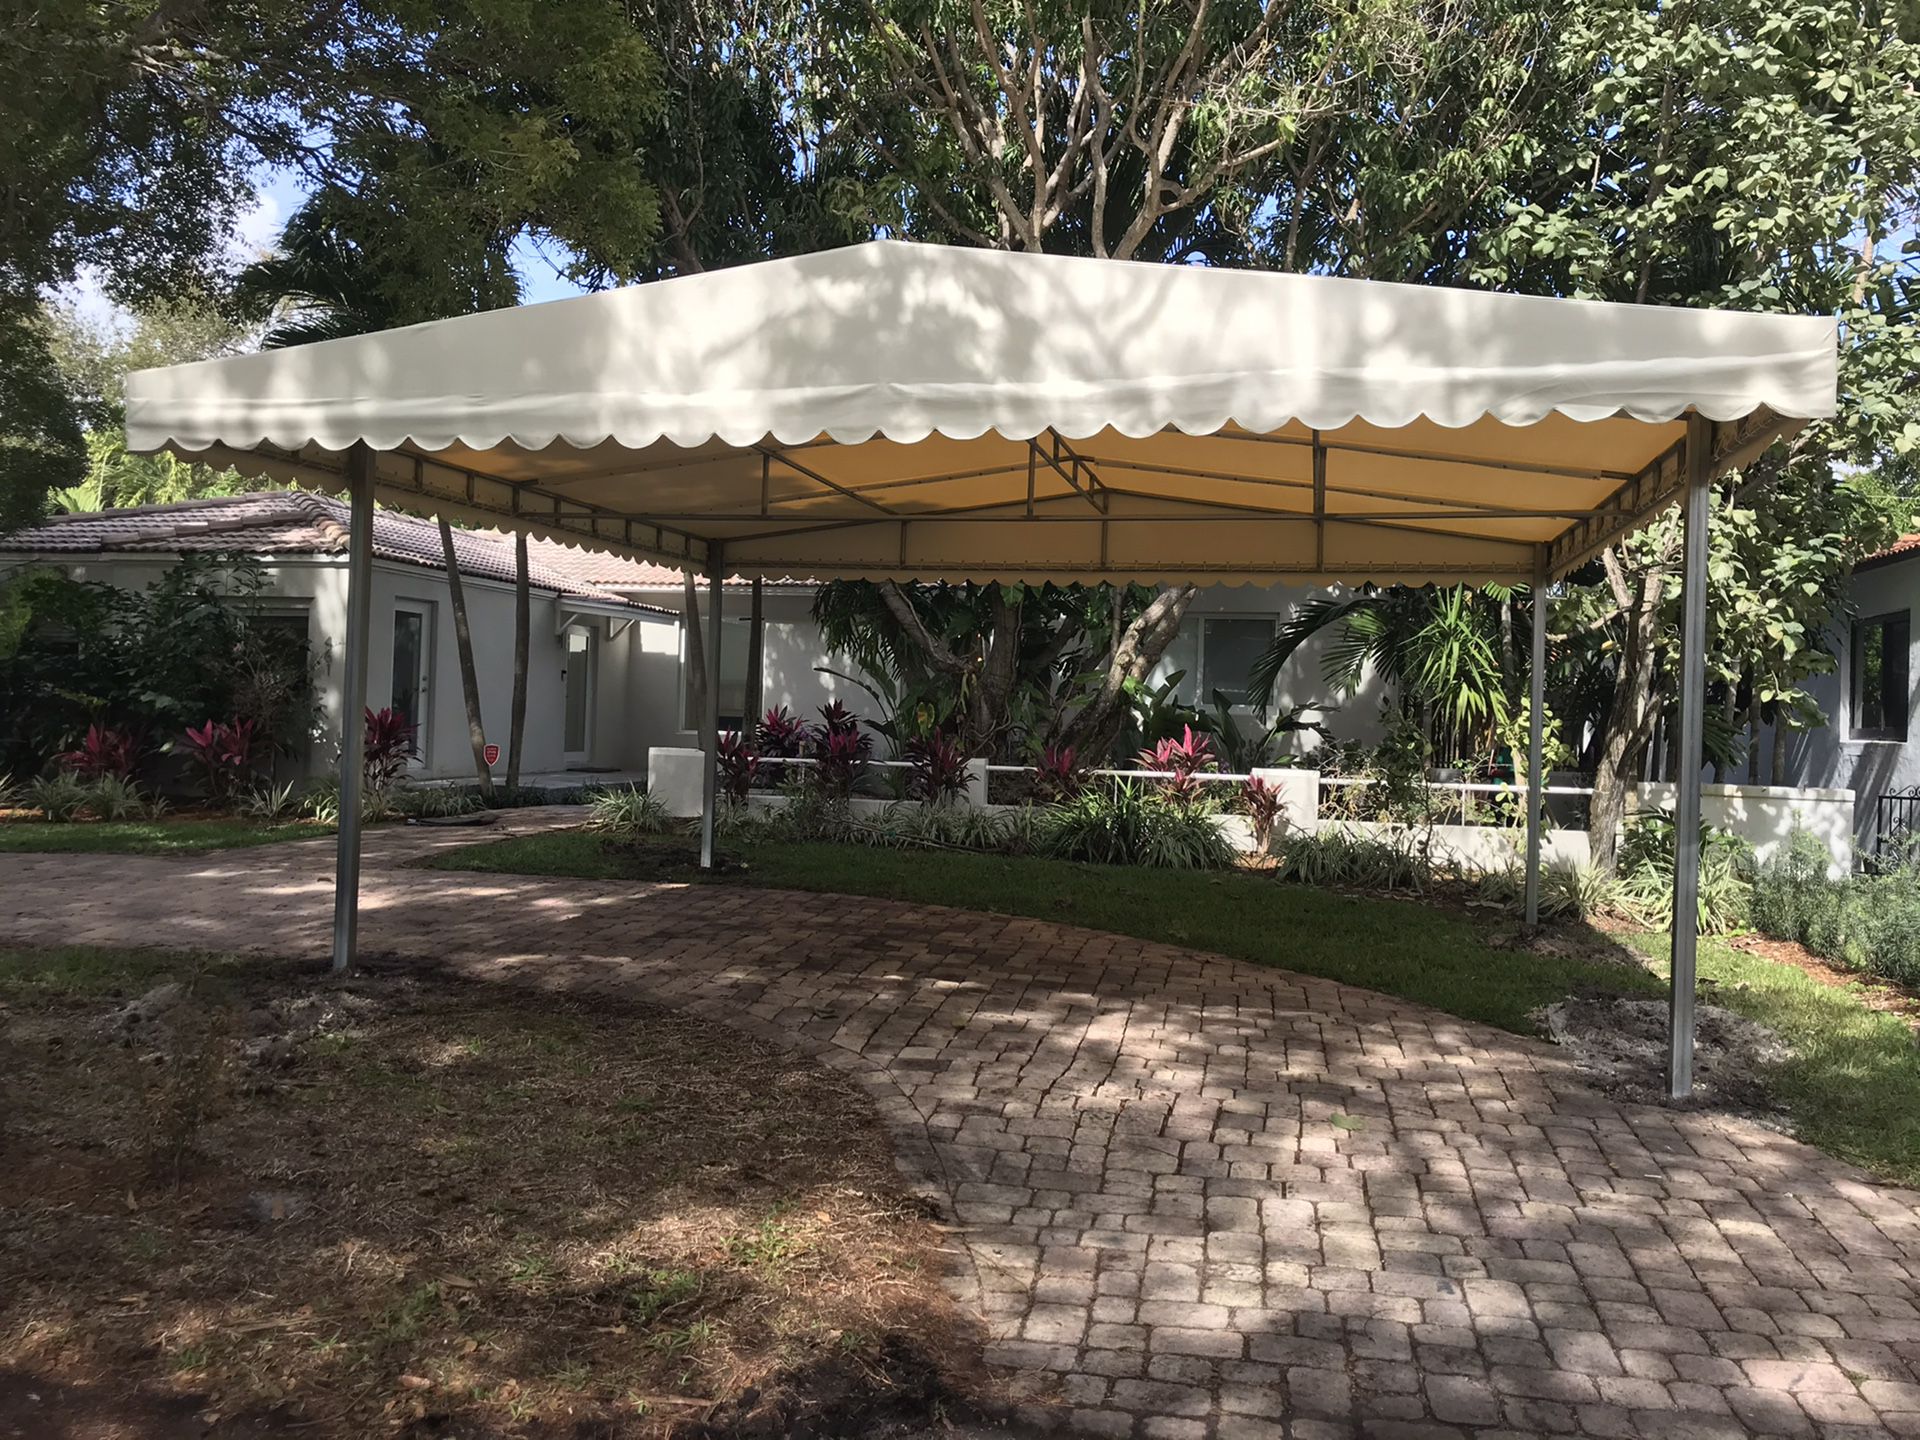 Comercial awnings